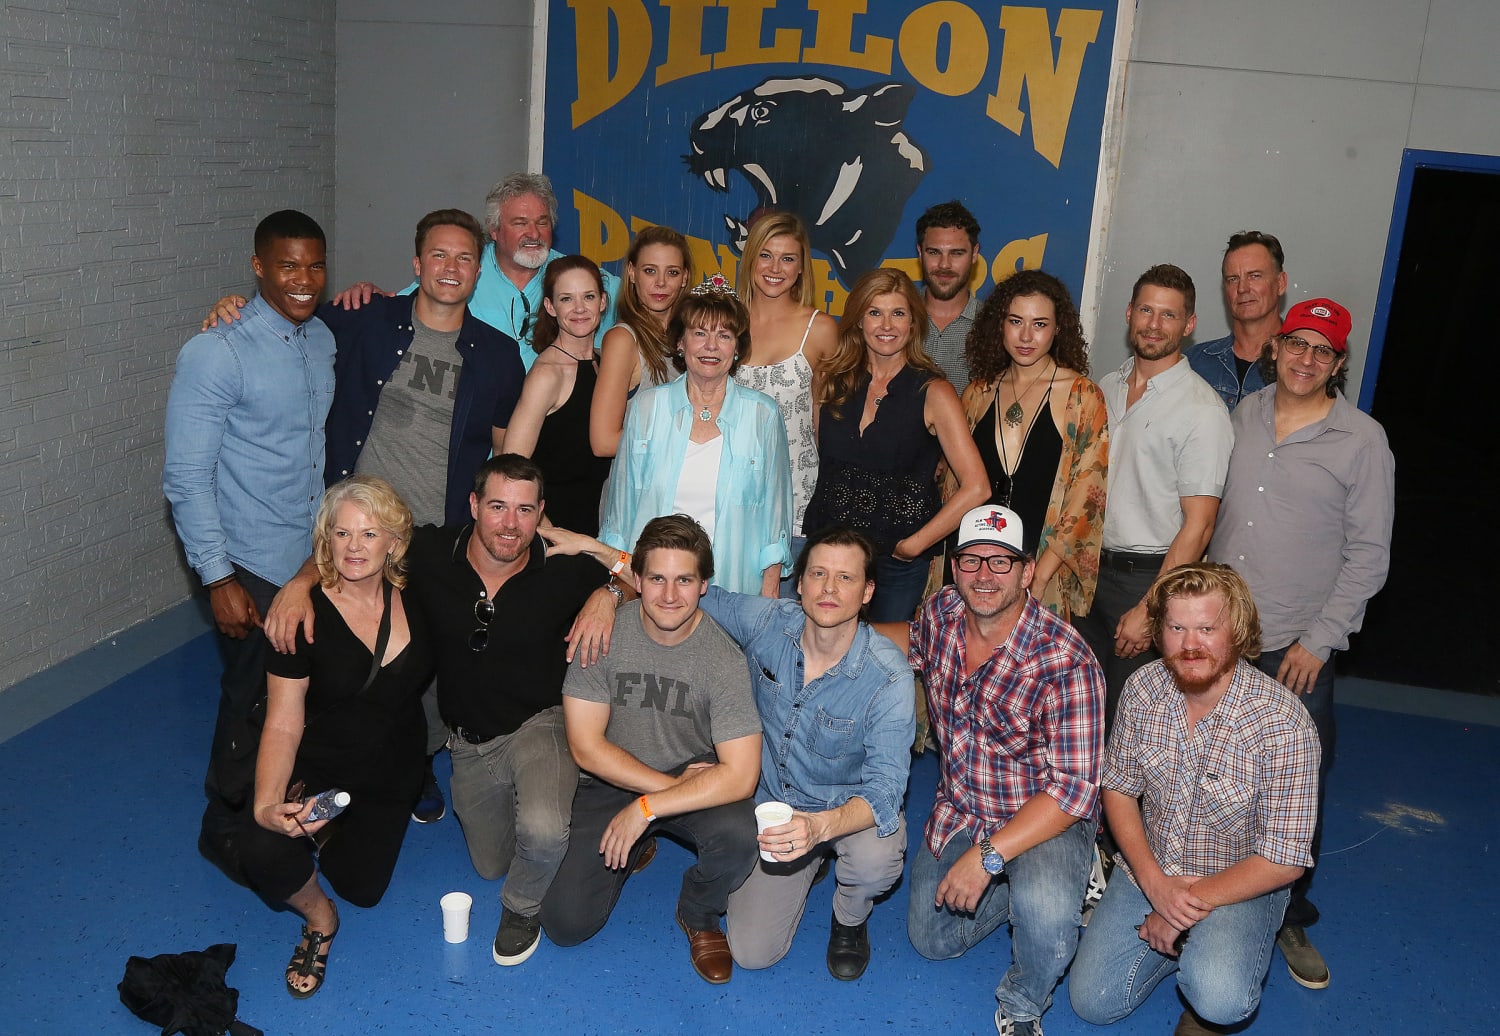 What the Friday Night Lights Cast Looks Like Now - FNL Cast Then